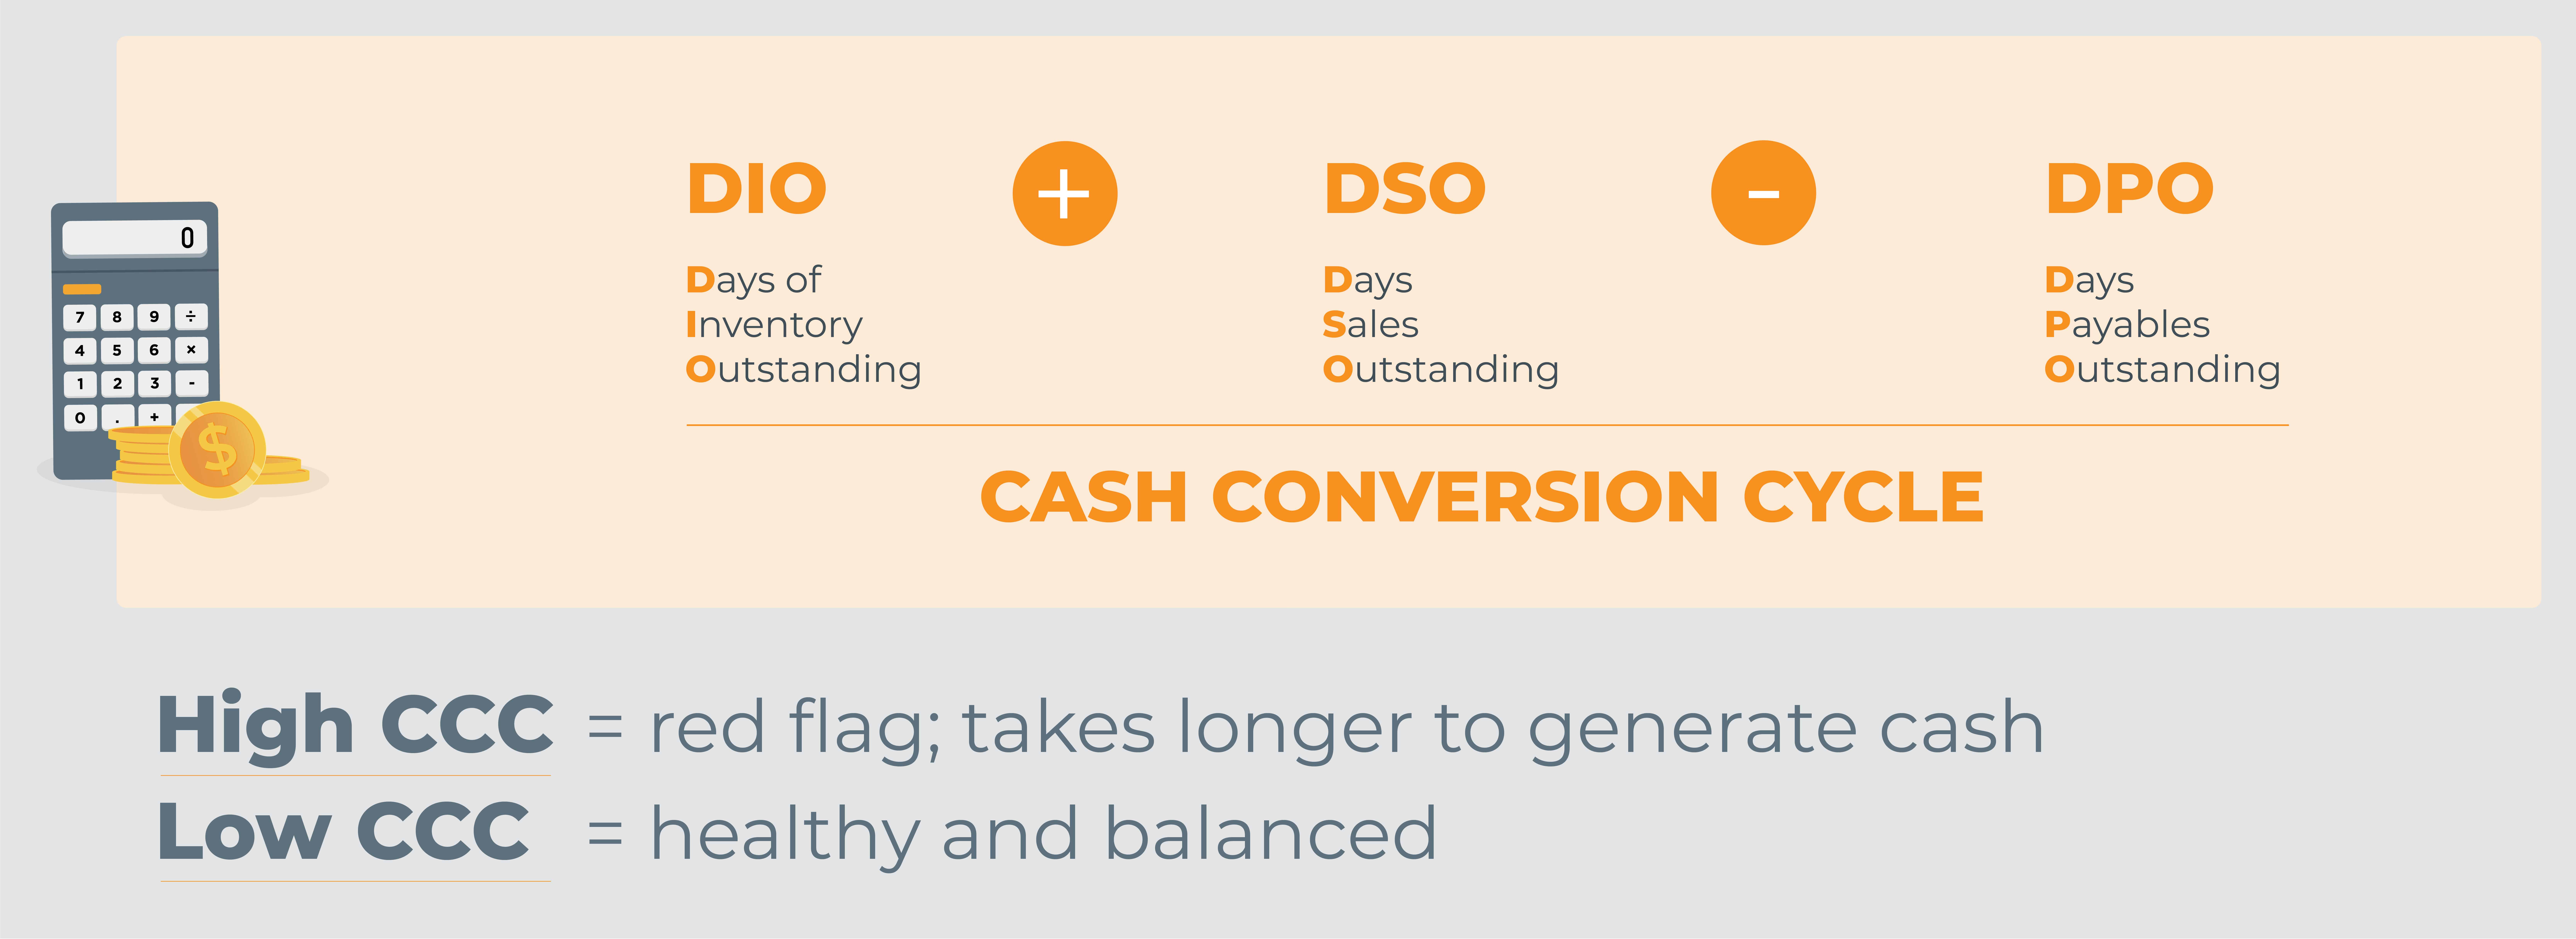 Cash conversion cycle (days of inventory outstanding + days of sales outstanding – days payable outstanding)